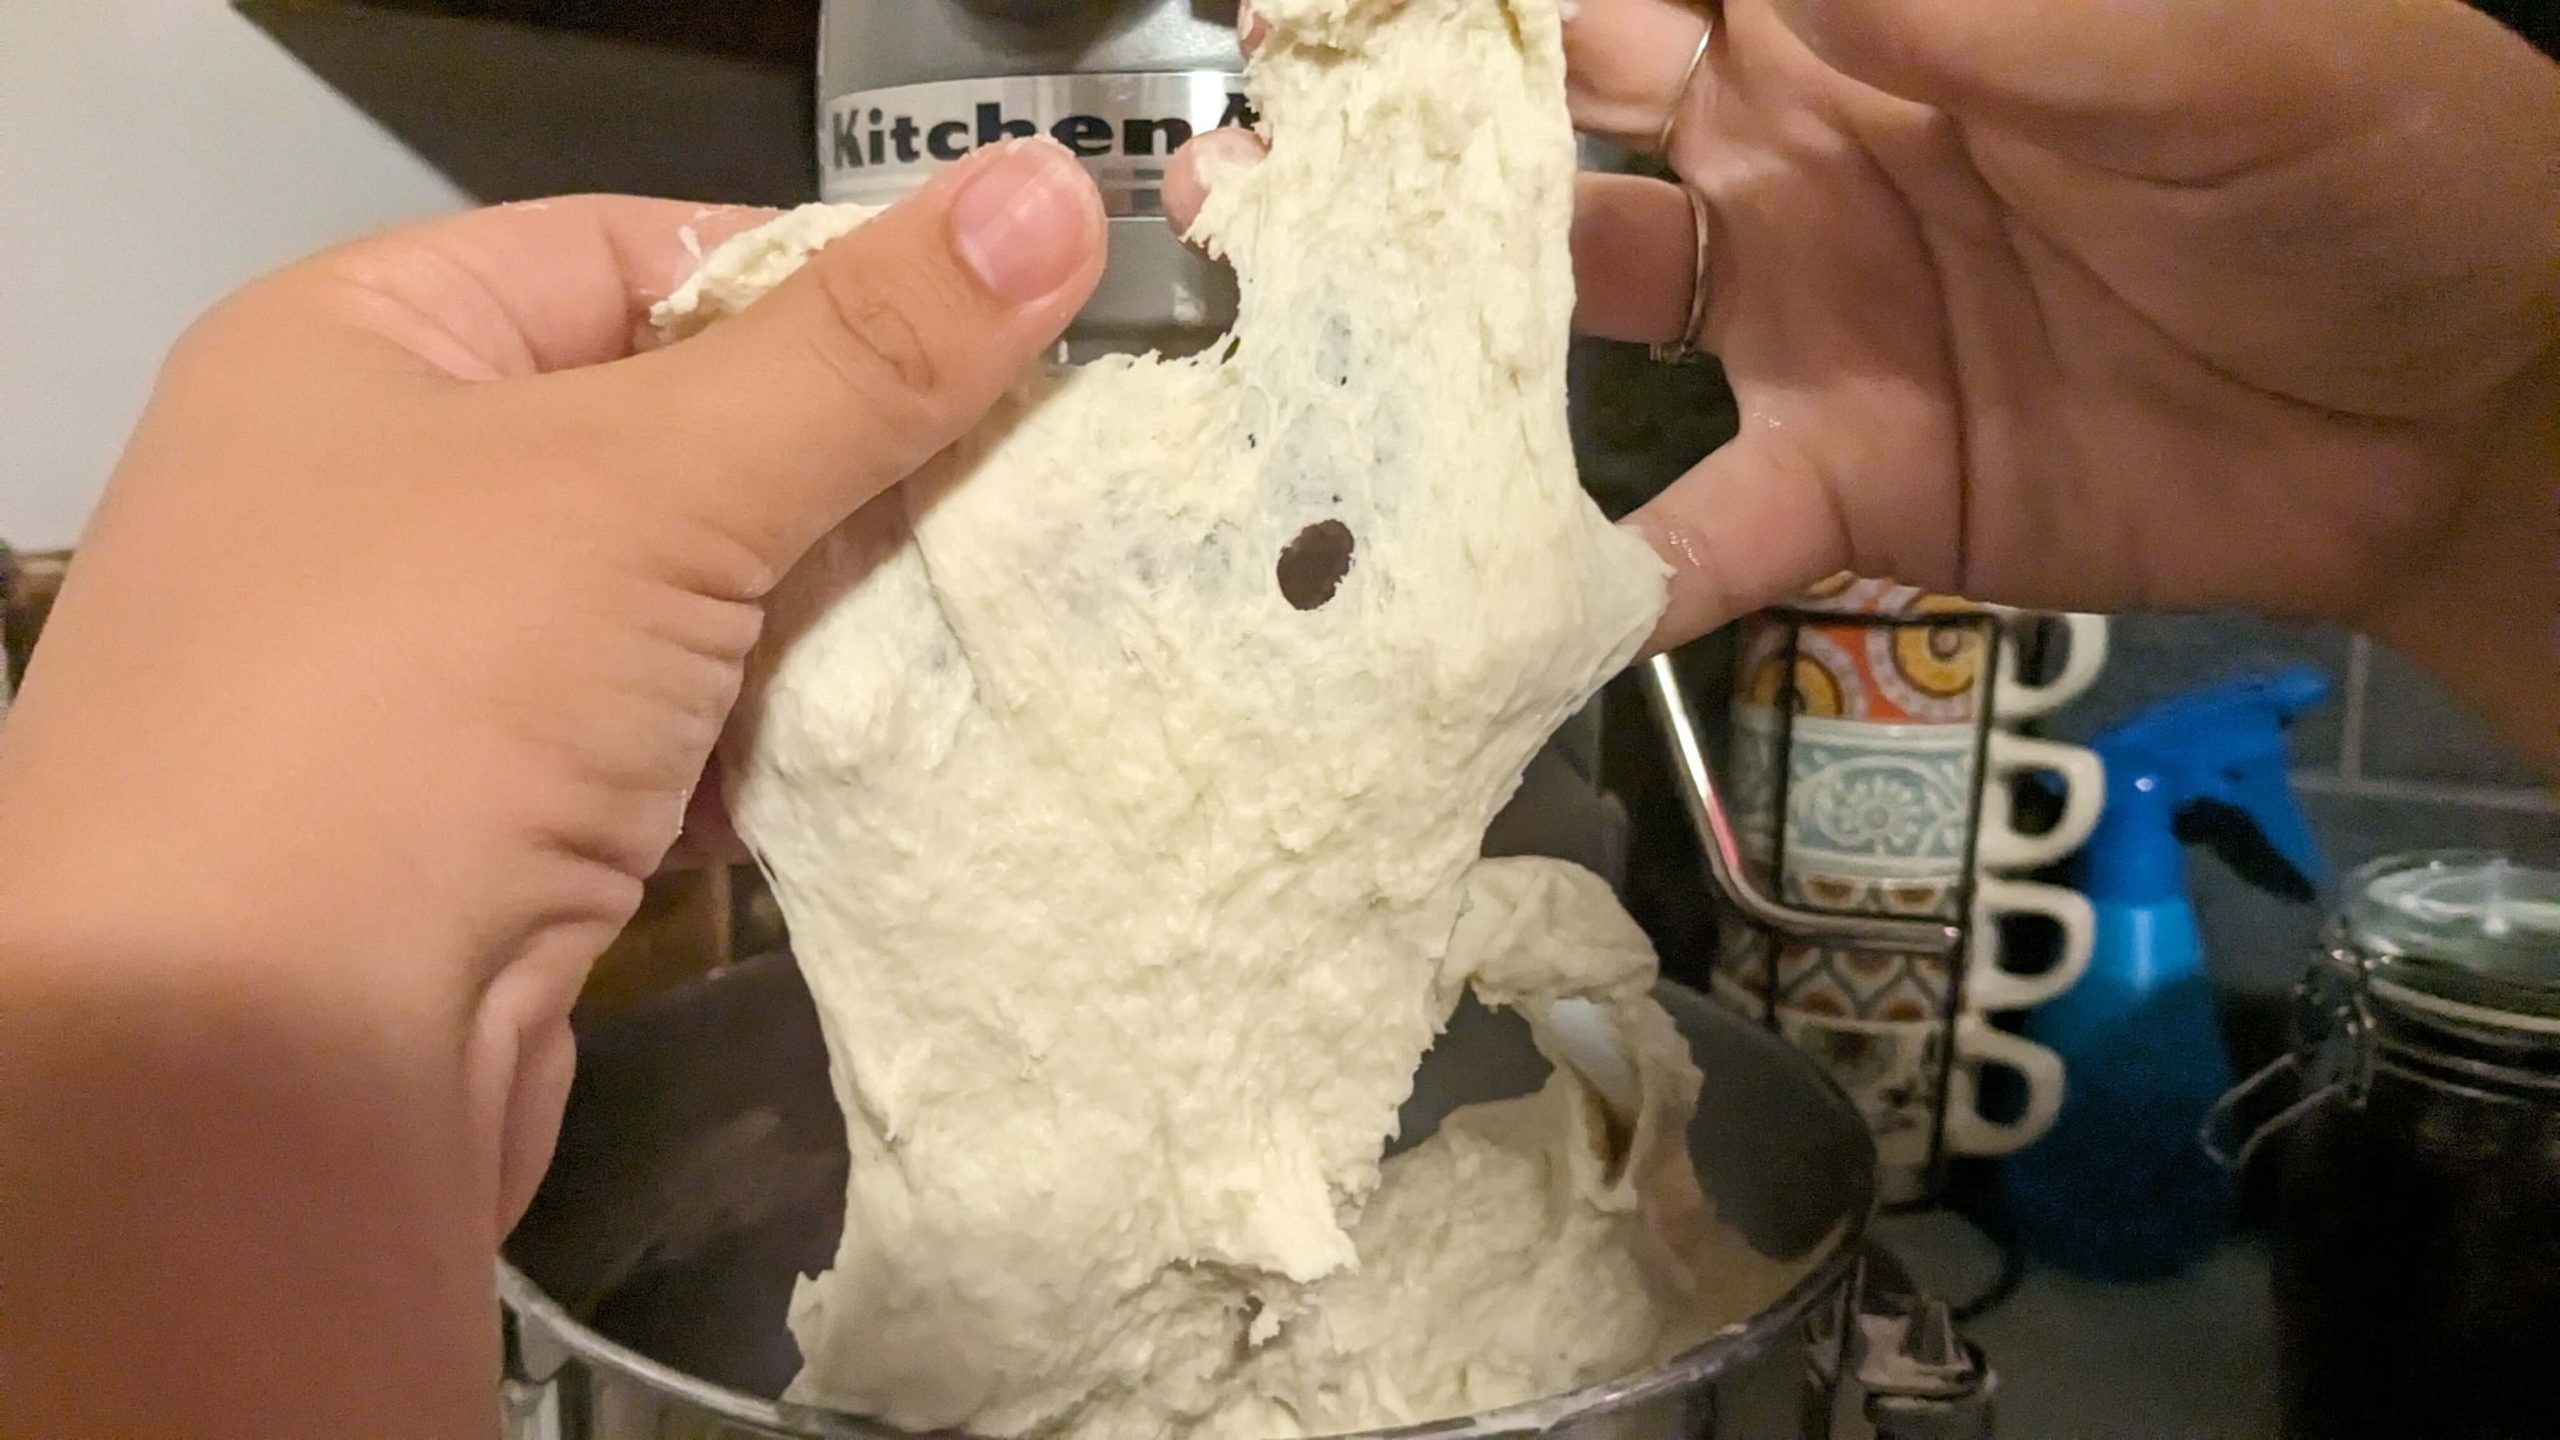 woman stretching dough that rips in front of a kitchen aid mixer